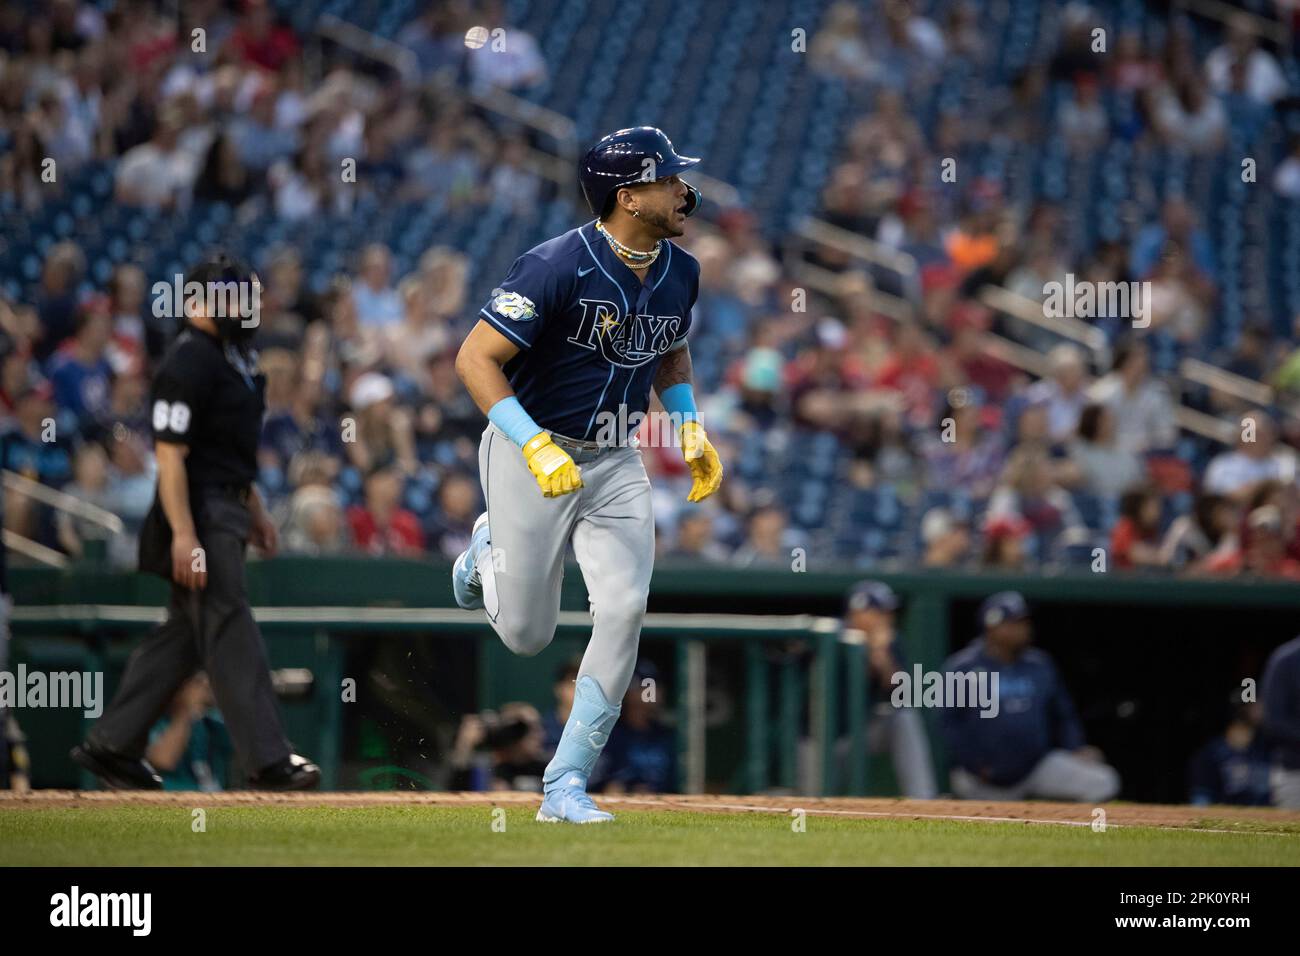 WASHINGTON, DC - APRIL 04: Tampa Bay Rays center fielder Jose Siri (22)  focuses on the pitcher during the Tampa Bay Rays versus Washington  Nationals MLB game at Nationals Park on April